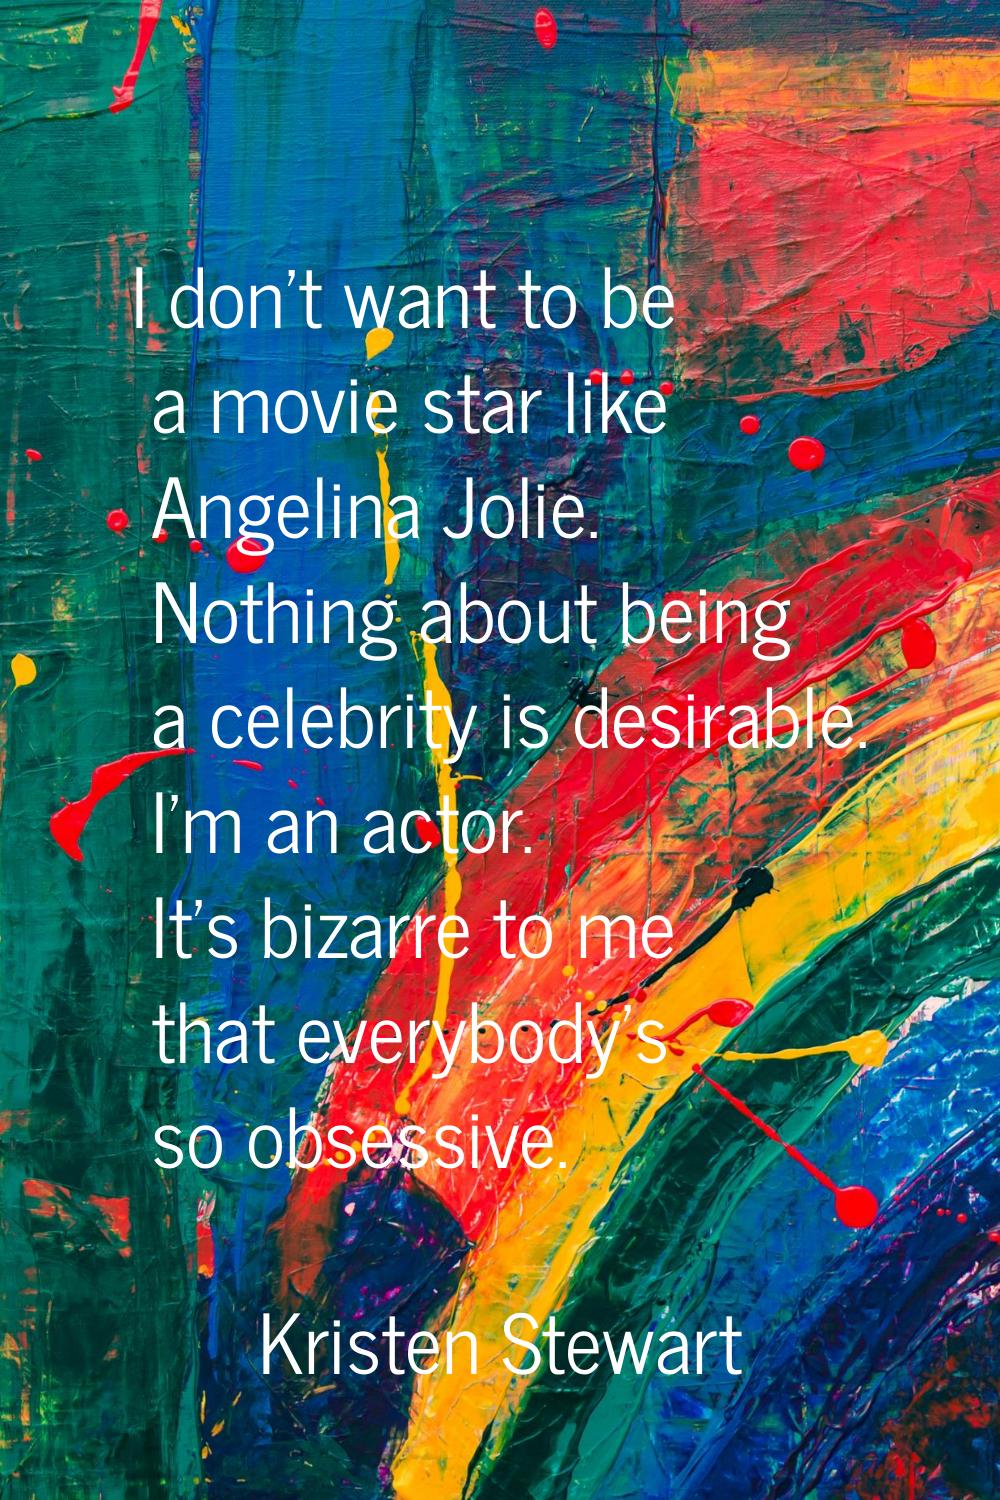 I don't want to be a movie star like Angelina Jolie. Nothing about being a celebrity is desirable. 